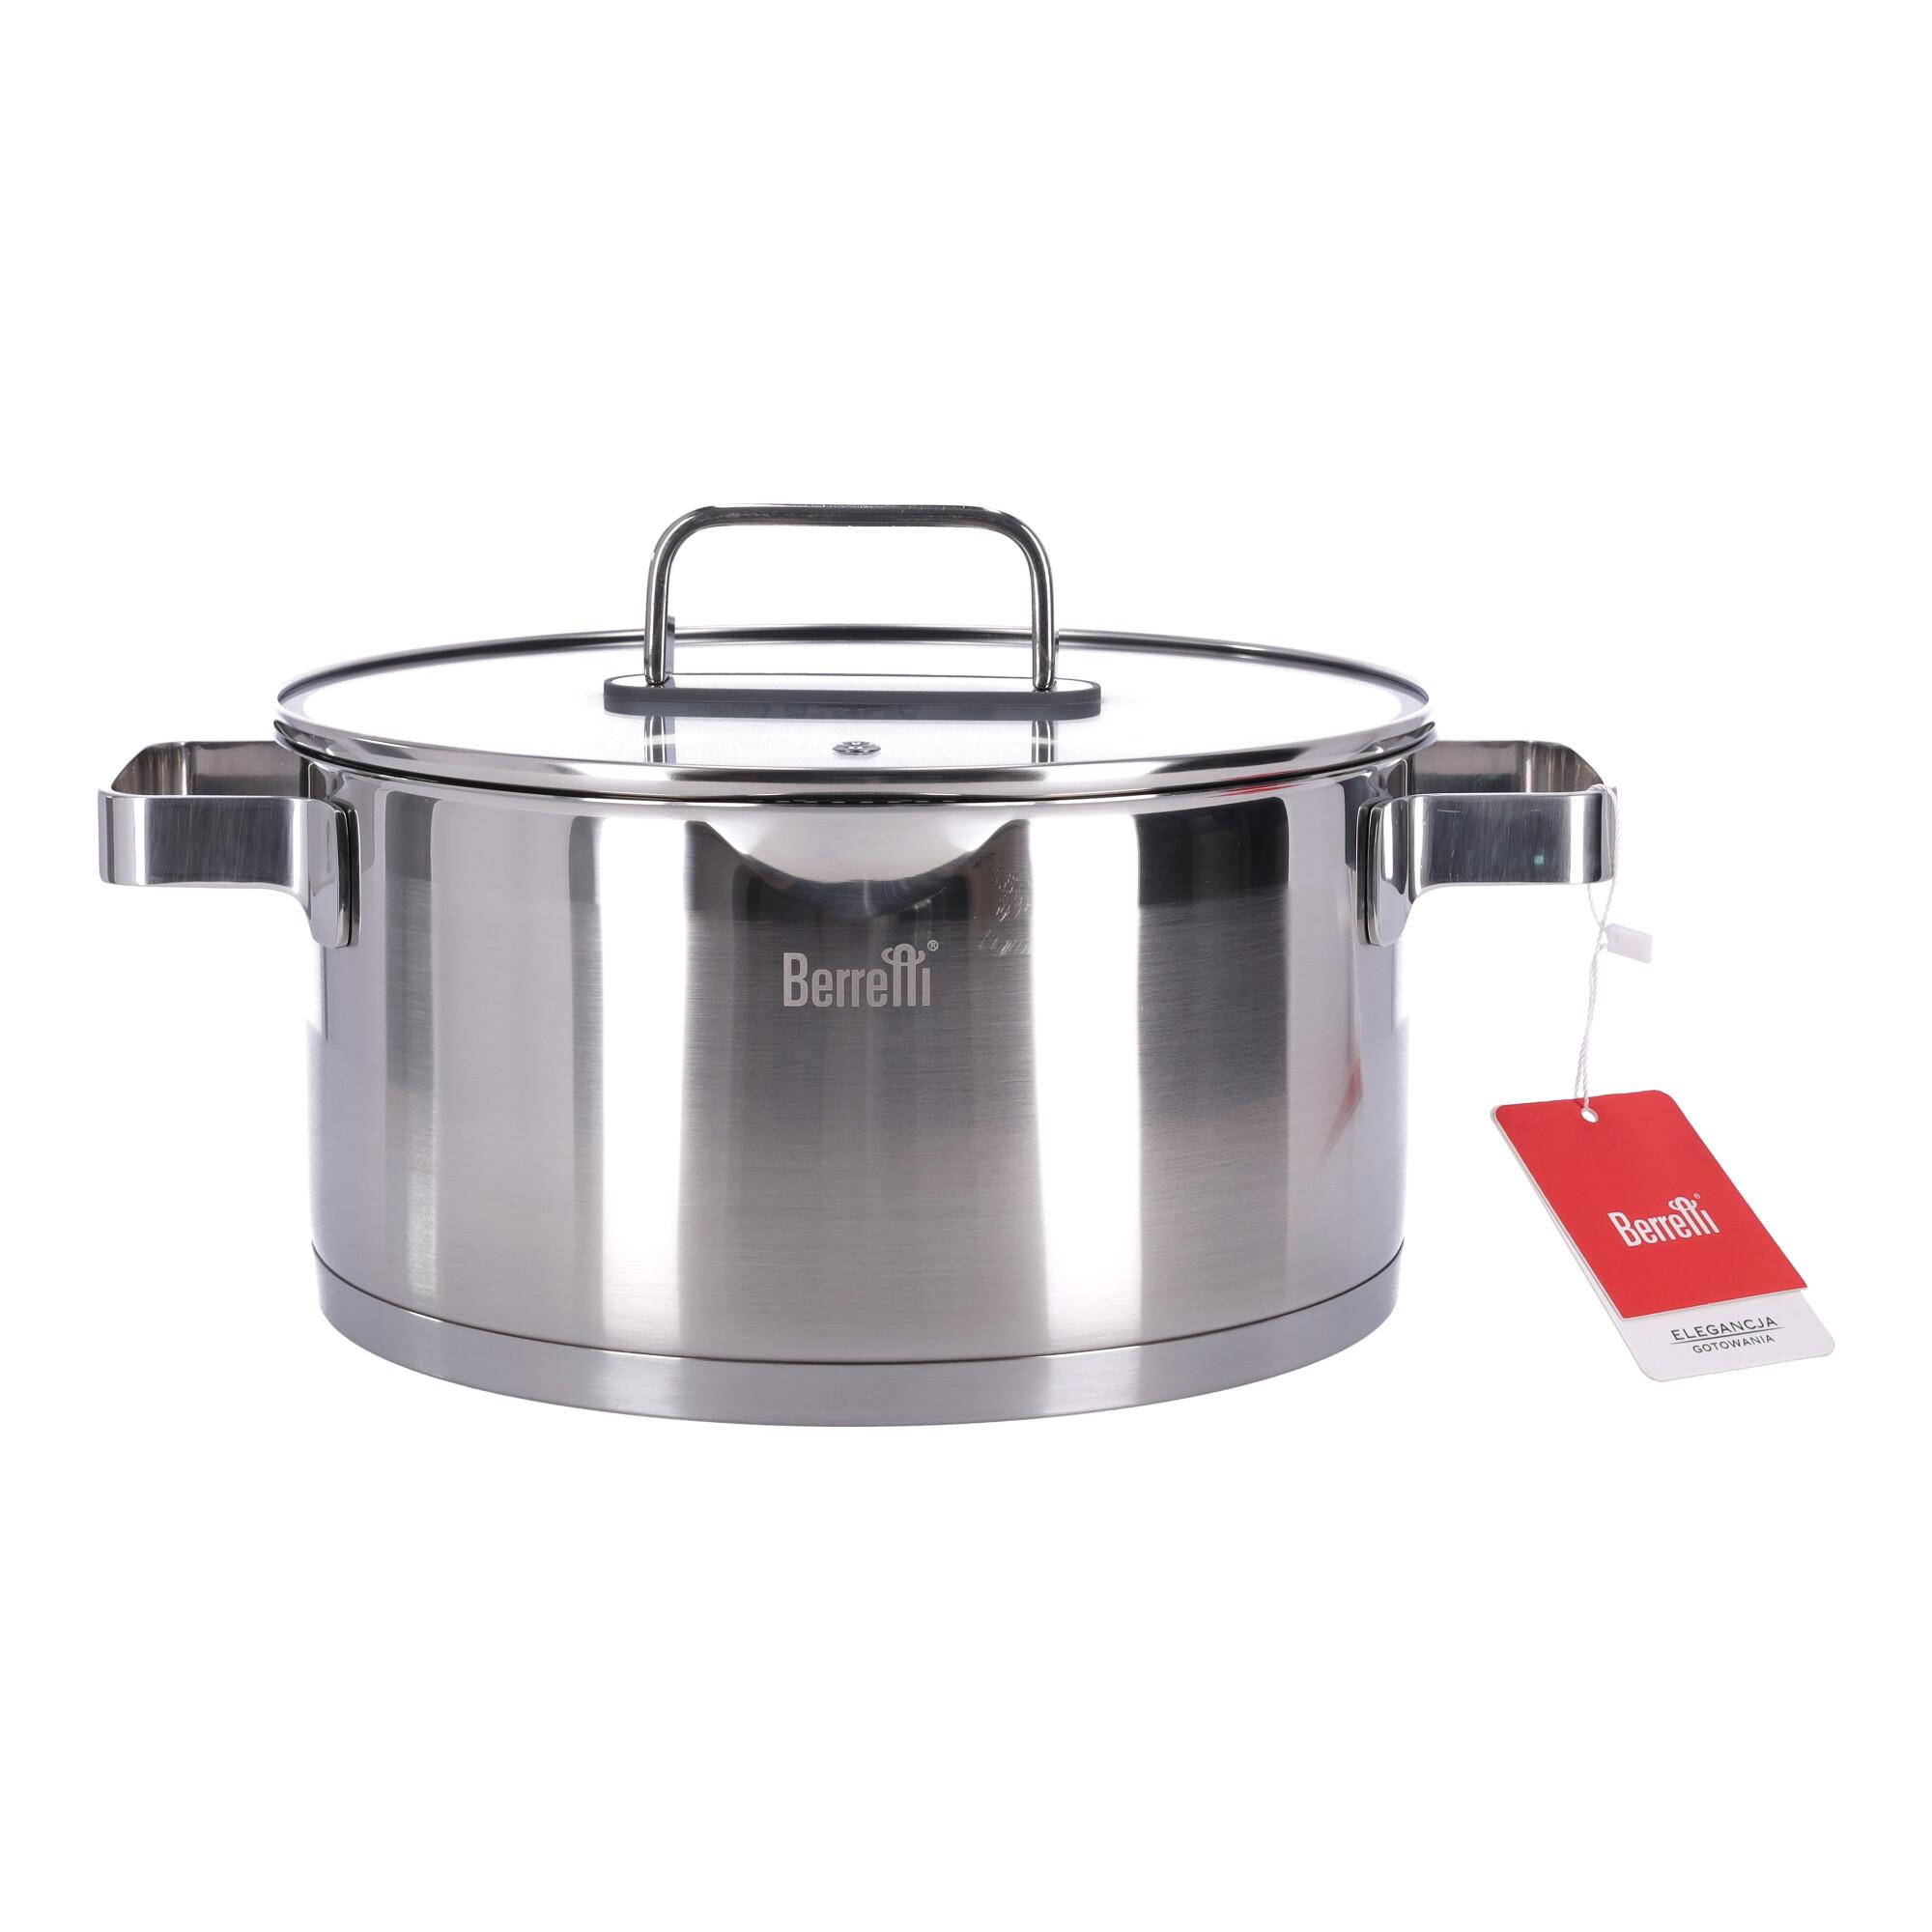 Stainless steel pot with lid Mistral BERRETTI, 24 cm